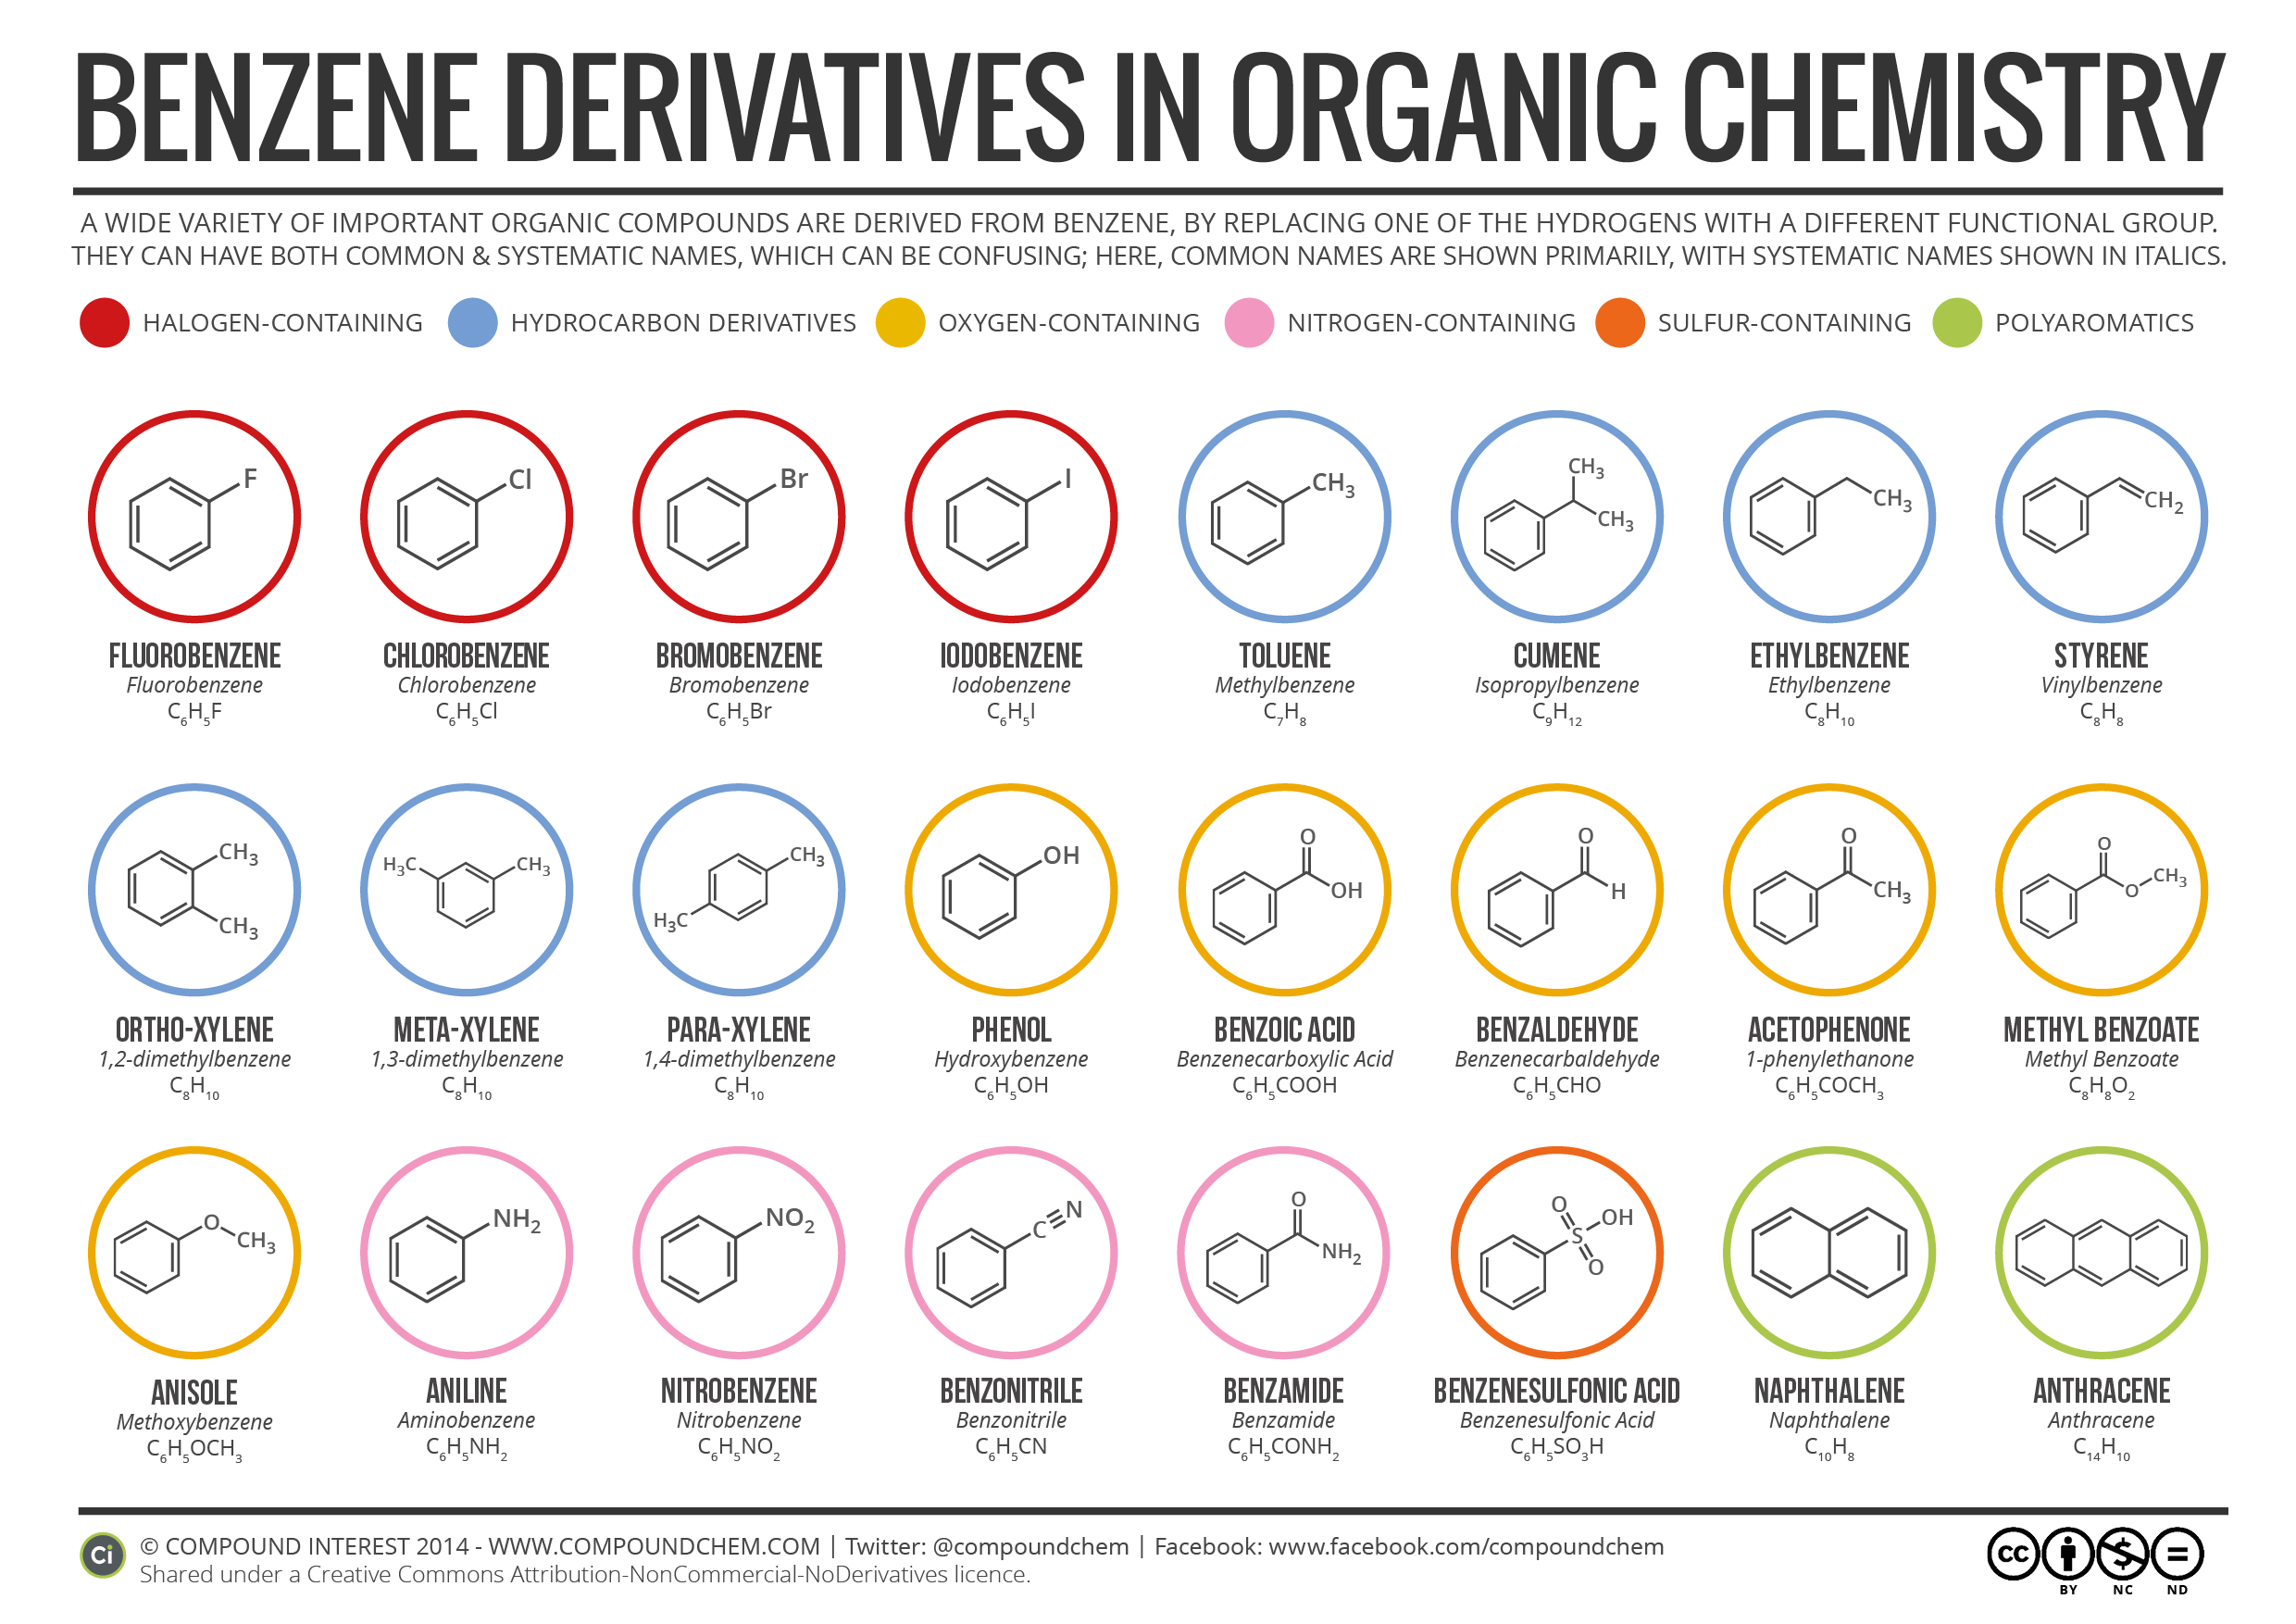 Substituted Benzene Derivatives and Their Nomenclature in Organic Chemistry